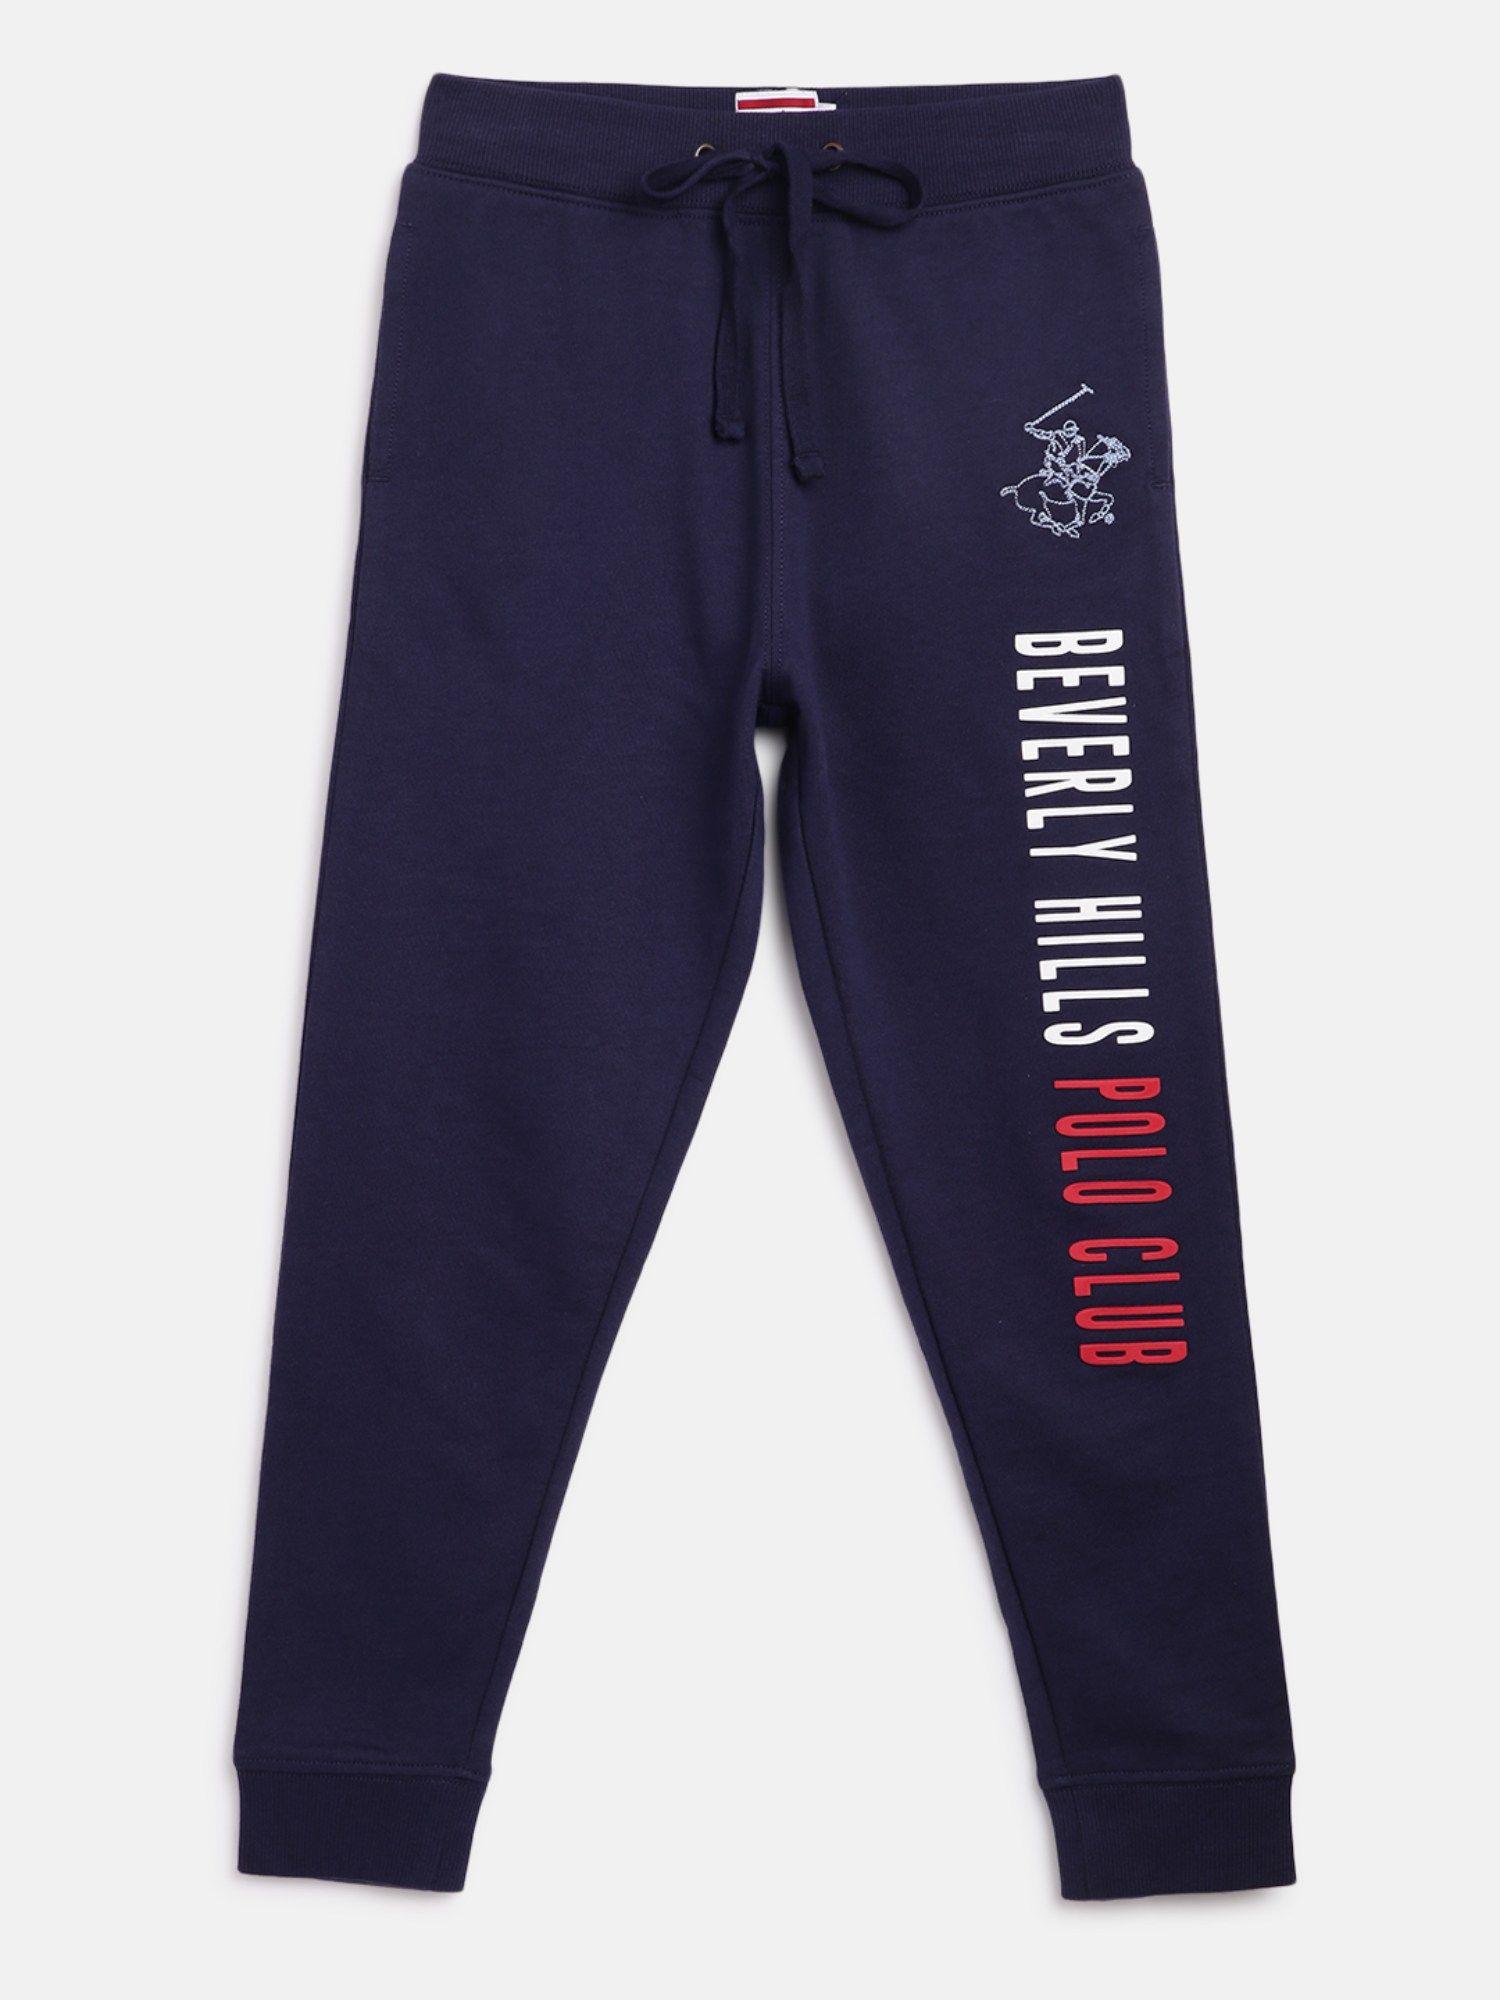 epic proportions joggers-navy blue